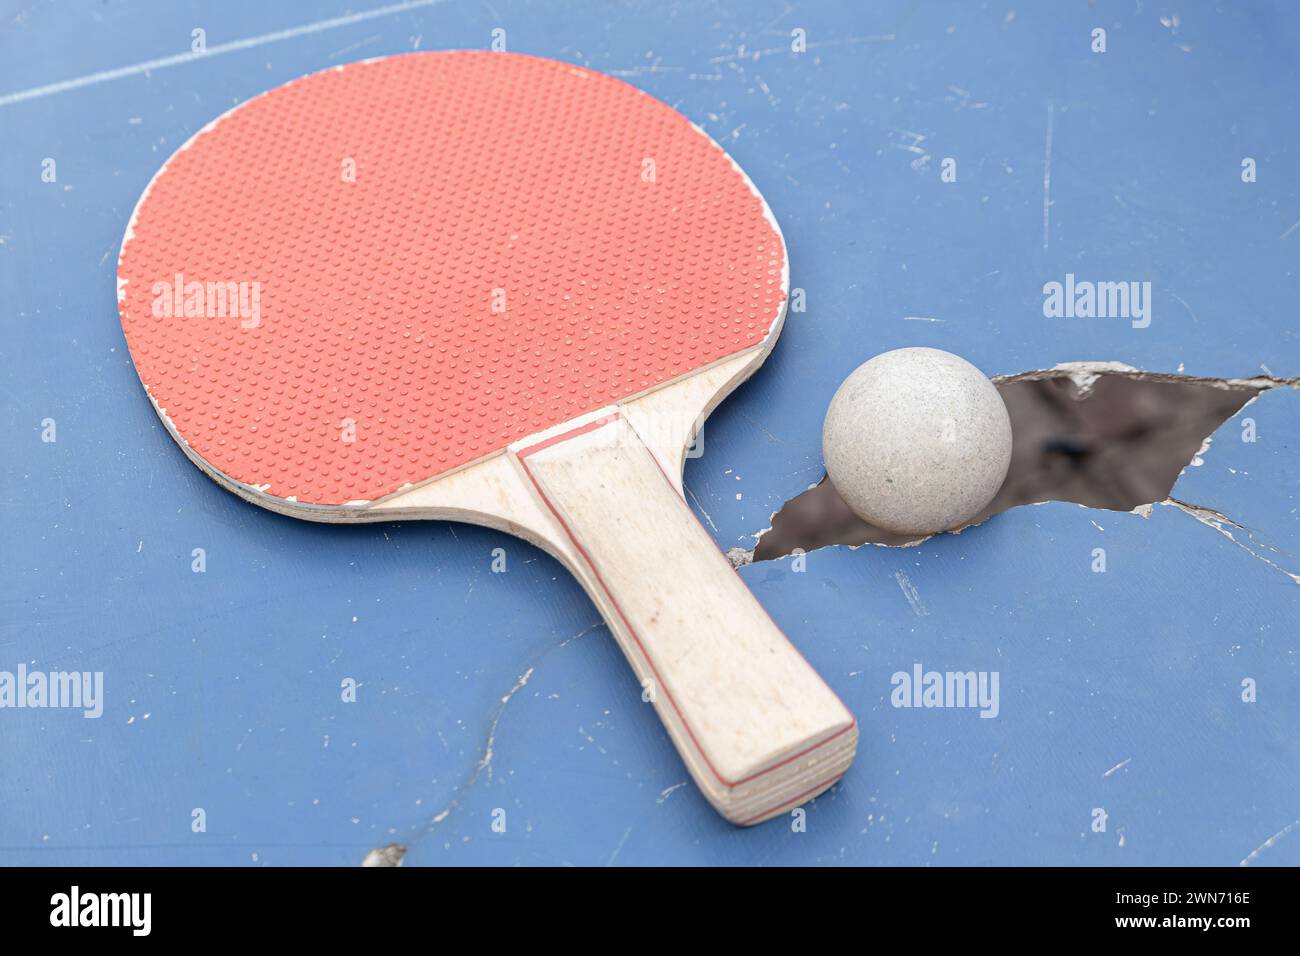 pingpong ball and racket on a damaged table at horizontal composition Stock Photo